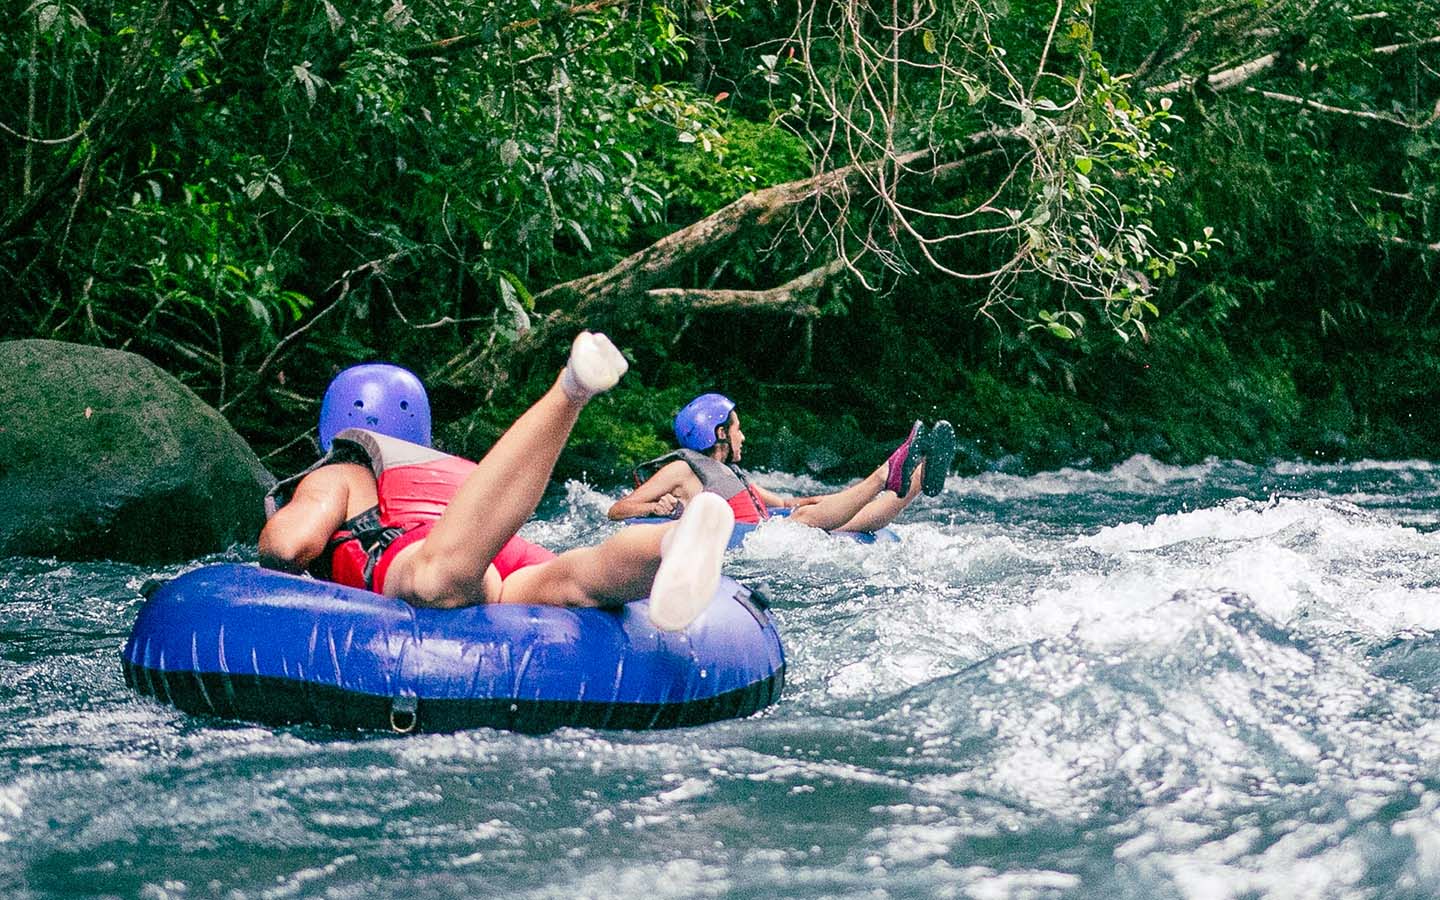 Two individuals are river tubing, battling through the choppy waters of a lush river. The forefront individual, wearing a red life vest and a blue helmet, has their arms raised high, seemingly enjoying the thrill. Behind them, a second individual in a similar protective gear appears focused on navigating through the rough river. Surrounding them, the river is lined with dense greenery, enhancing the sense of adventure in the wild